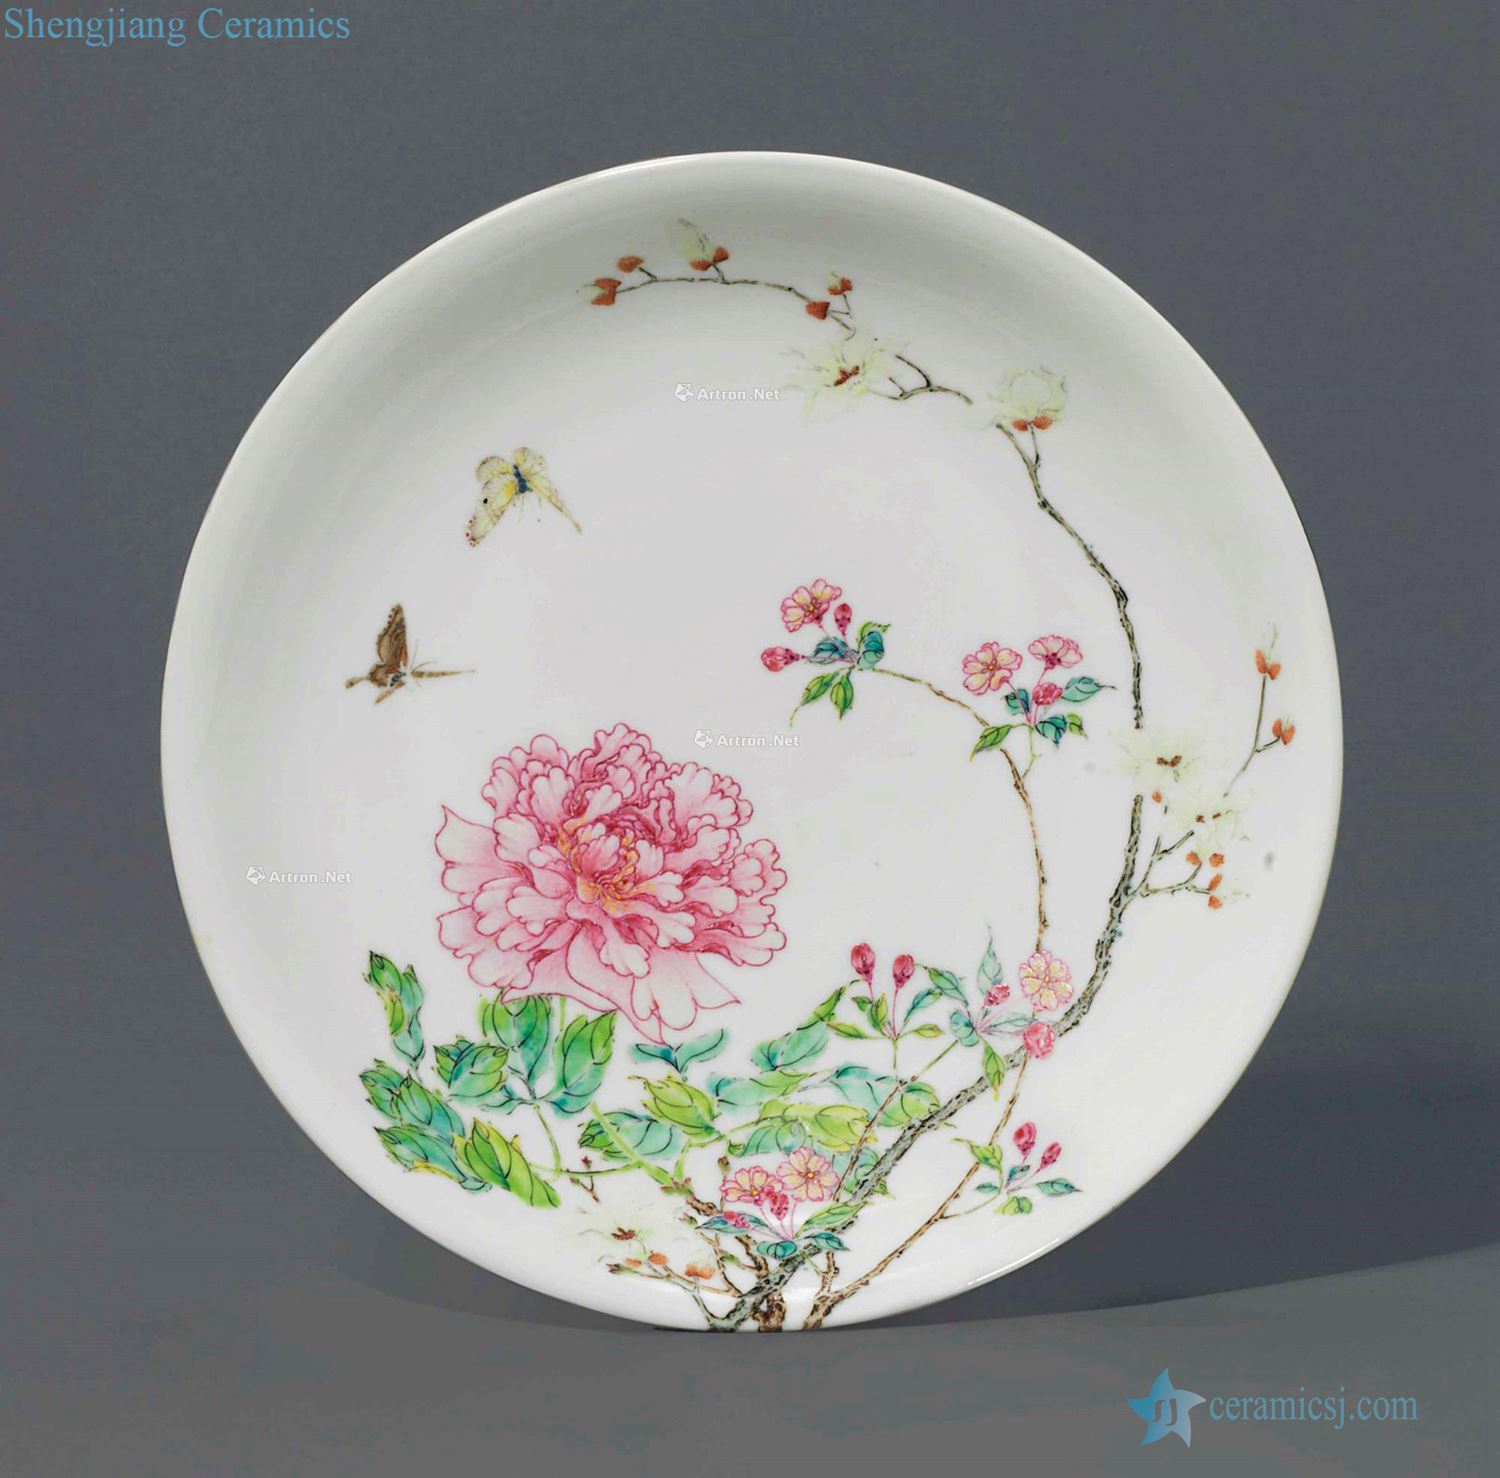 Qing yongzheng pastel CV 18 with a silver spoon in her mouth